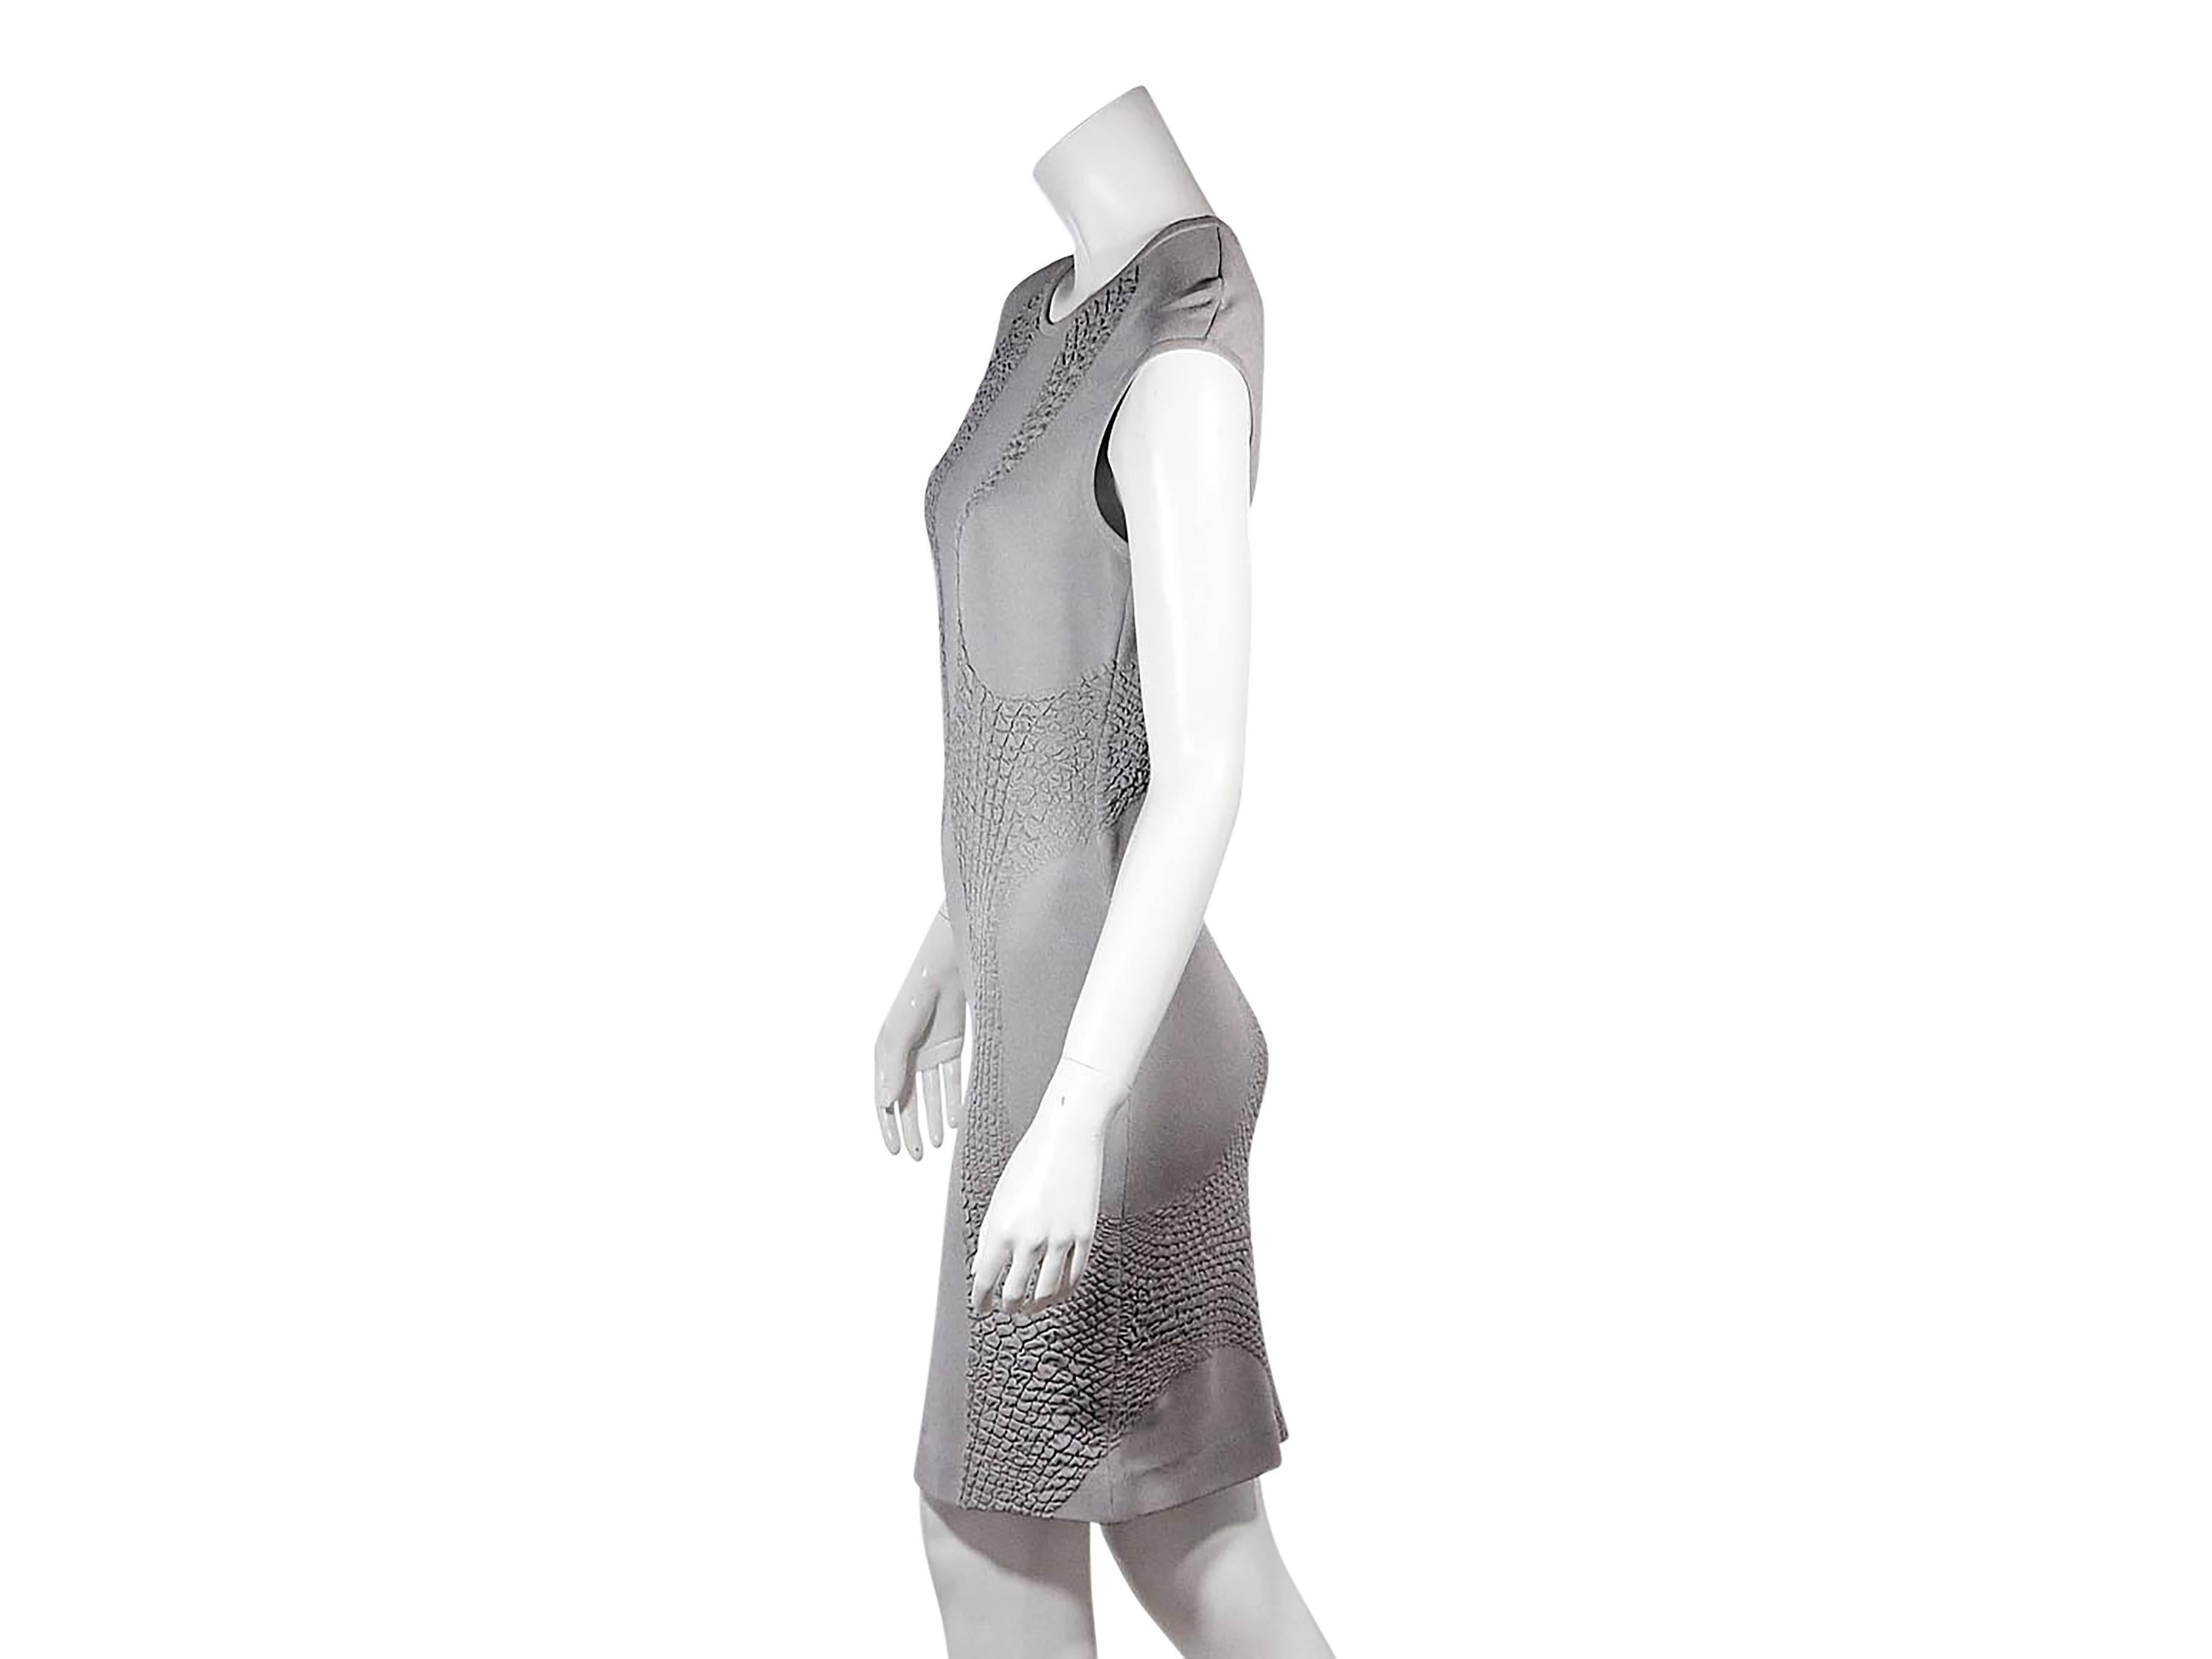 Product details: Grey knit sheath dress by Alexander McQueen. Form-fitting silhouette. Jewelneck. Cap sleeves. Pullover style. 
Condition: Pre-owned. Good. Minor wear on fabric.

Est. Retail $ 1,478.00